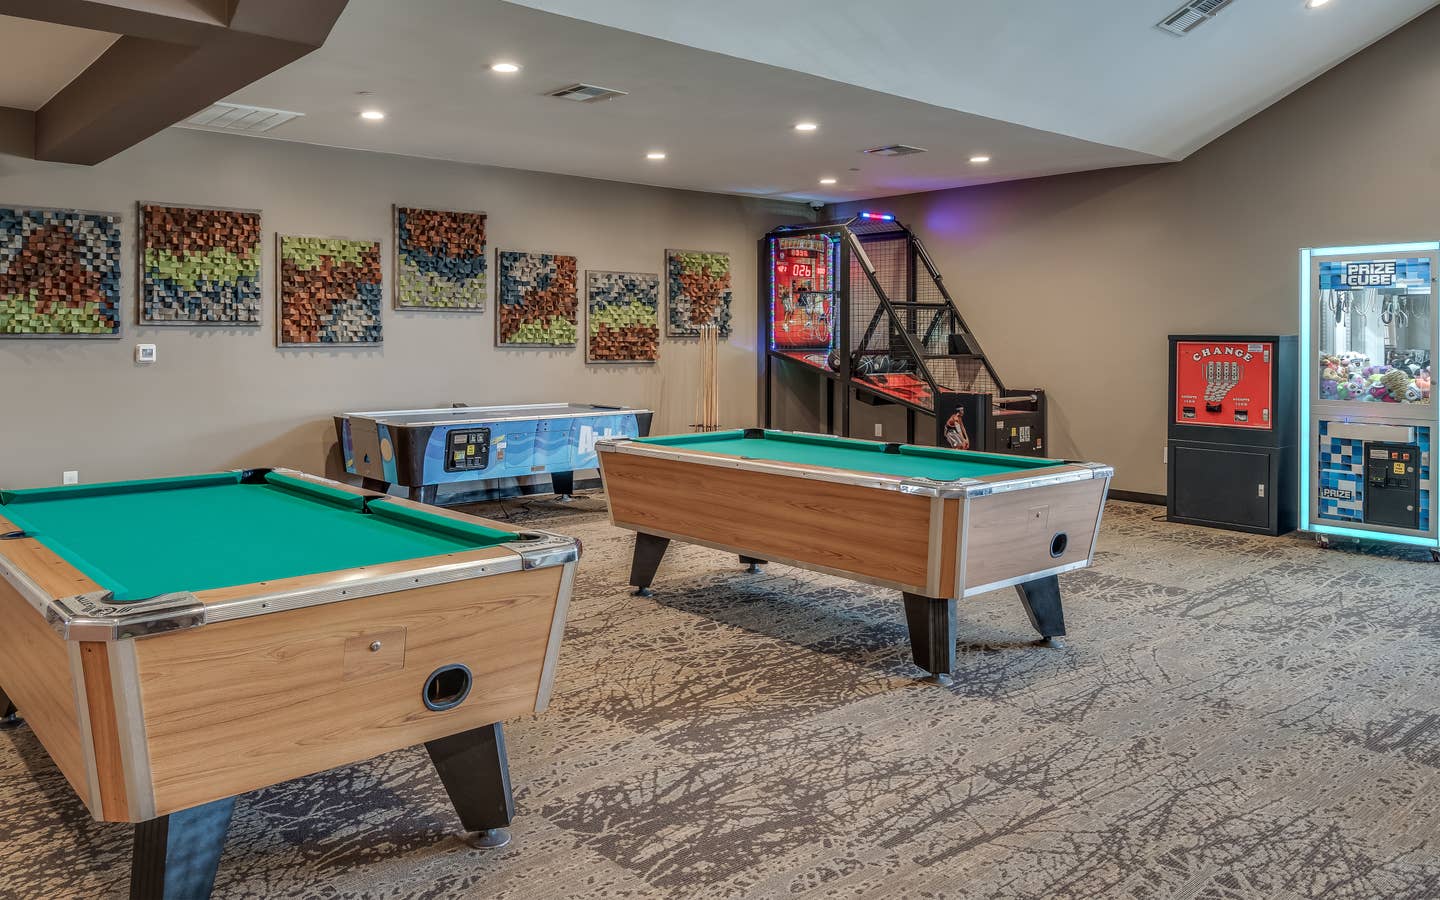 Game room with pool tables and air hockey at Piney Shores Resort in Conroe, Texas.